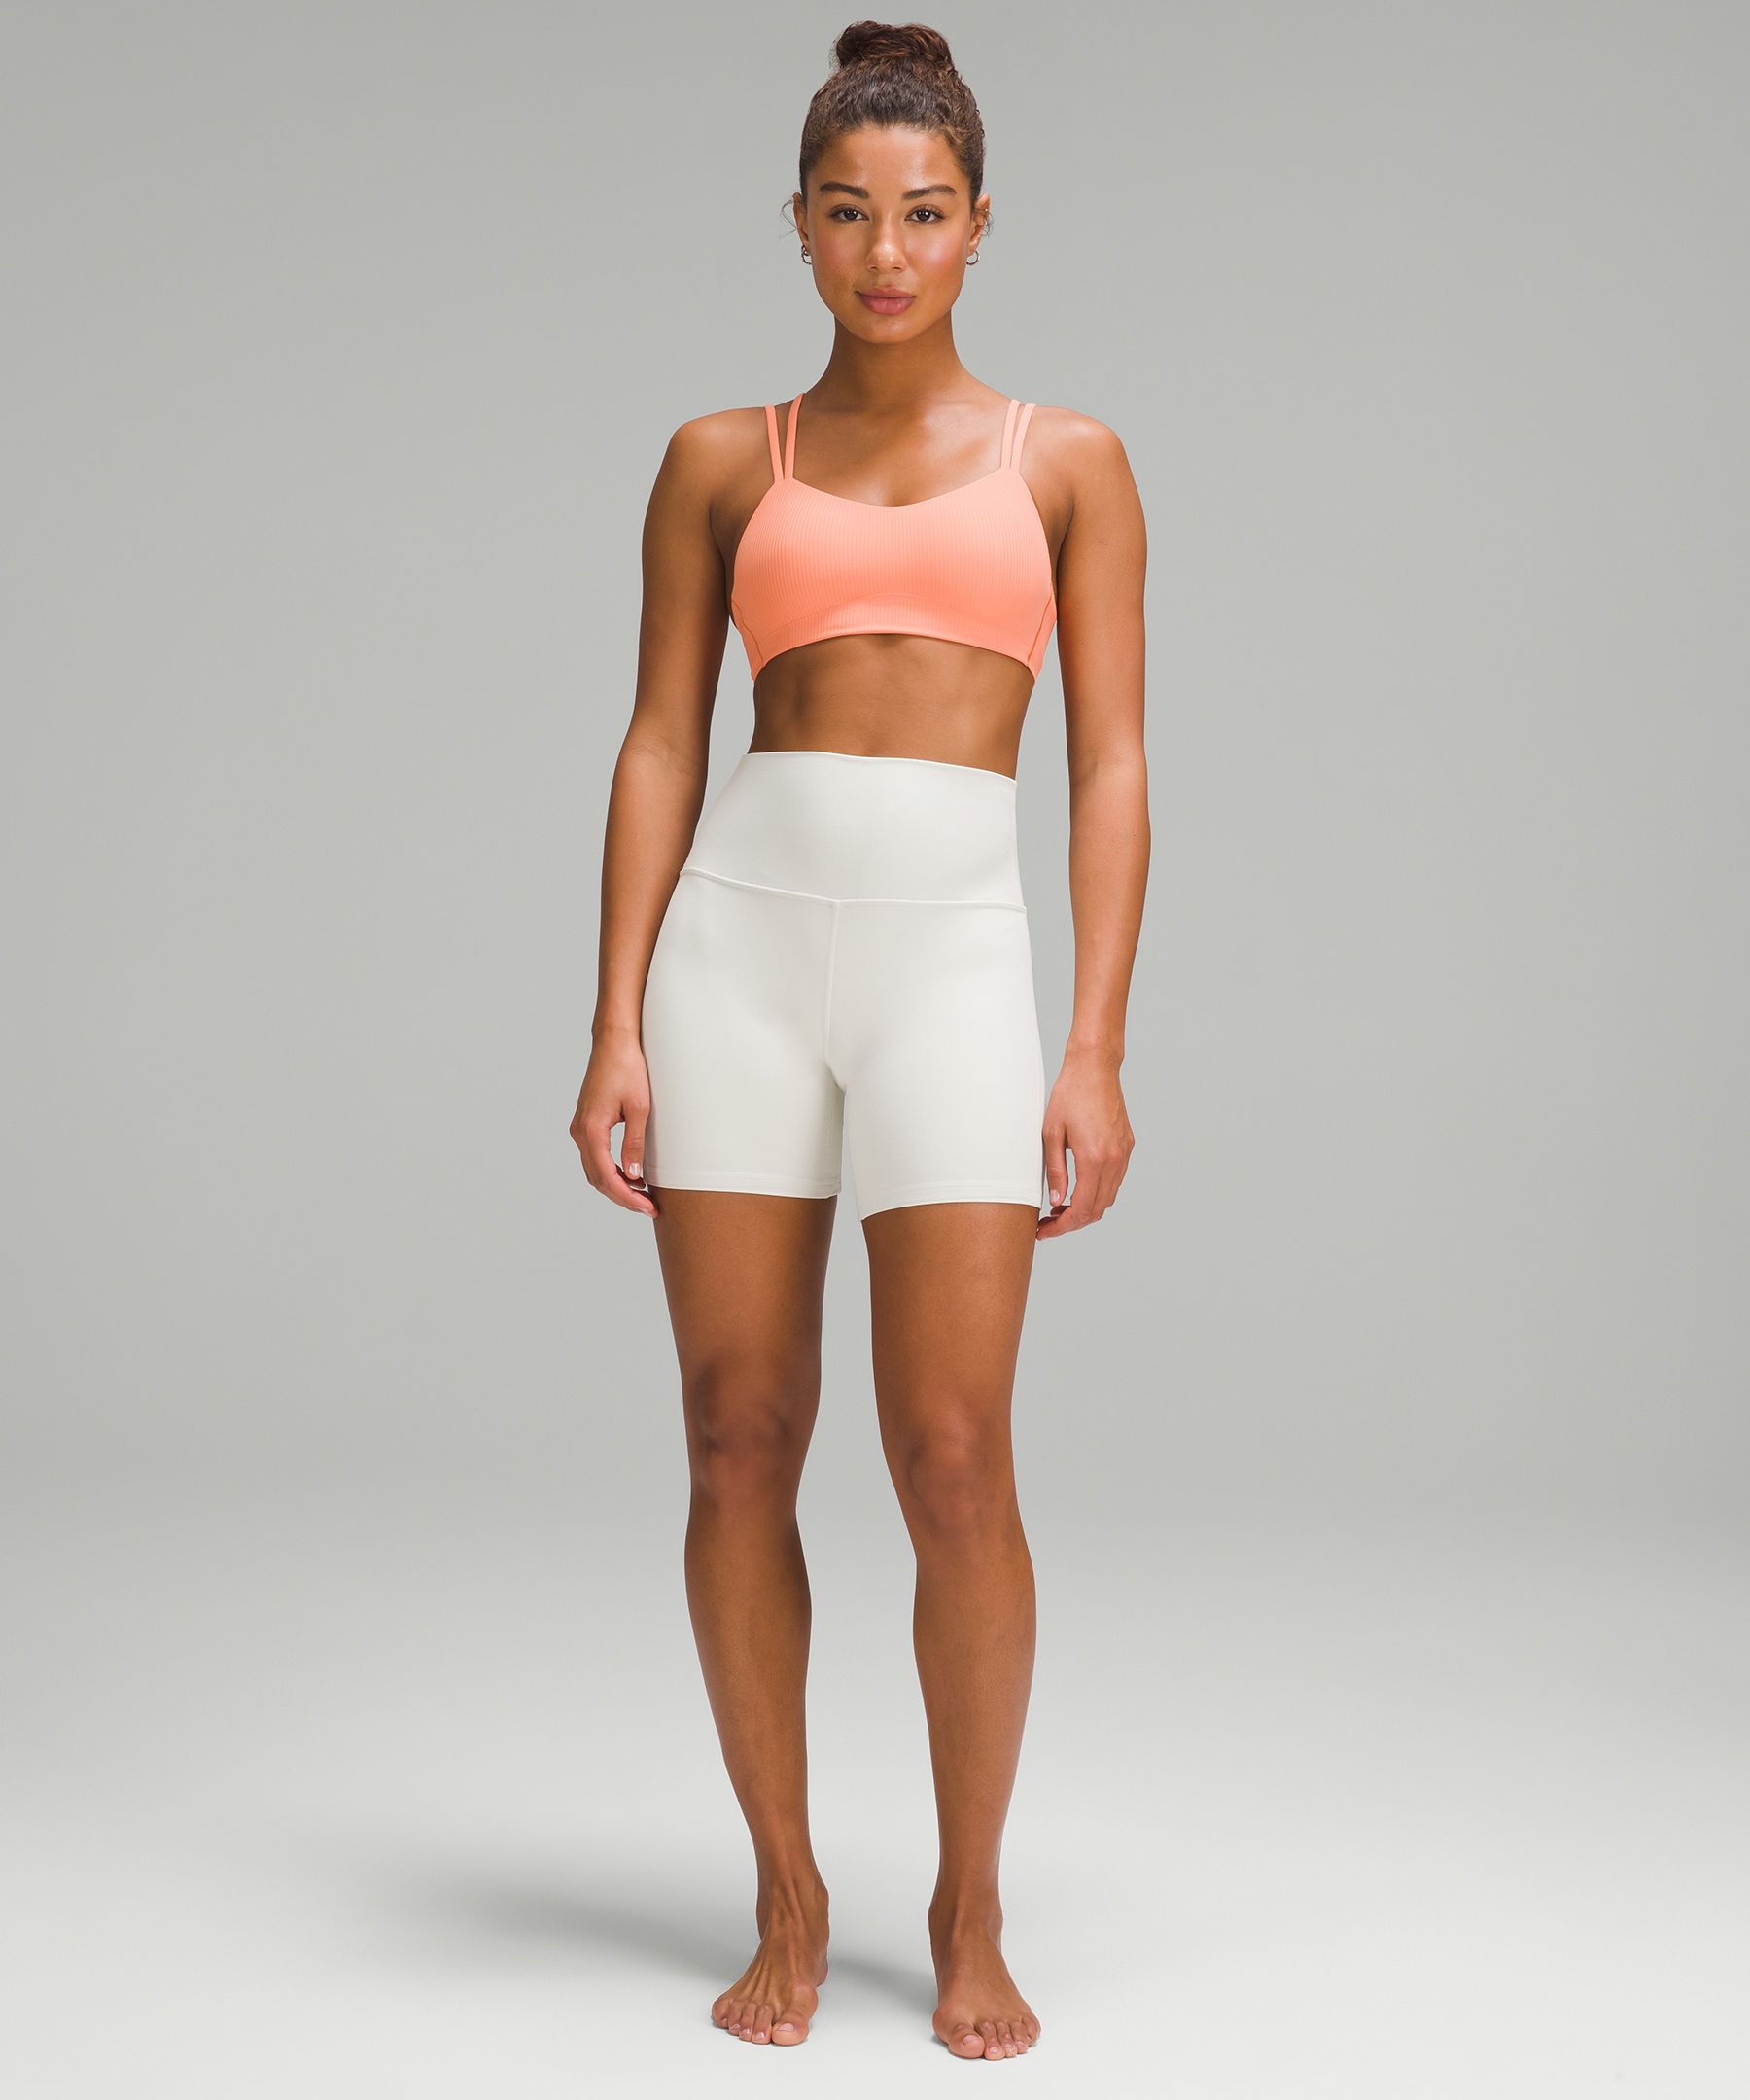 TGIF! Pilates outfit ft like a cloud bra in finch yellow and pocc in white